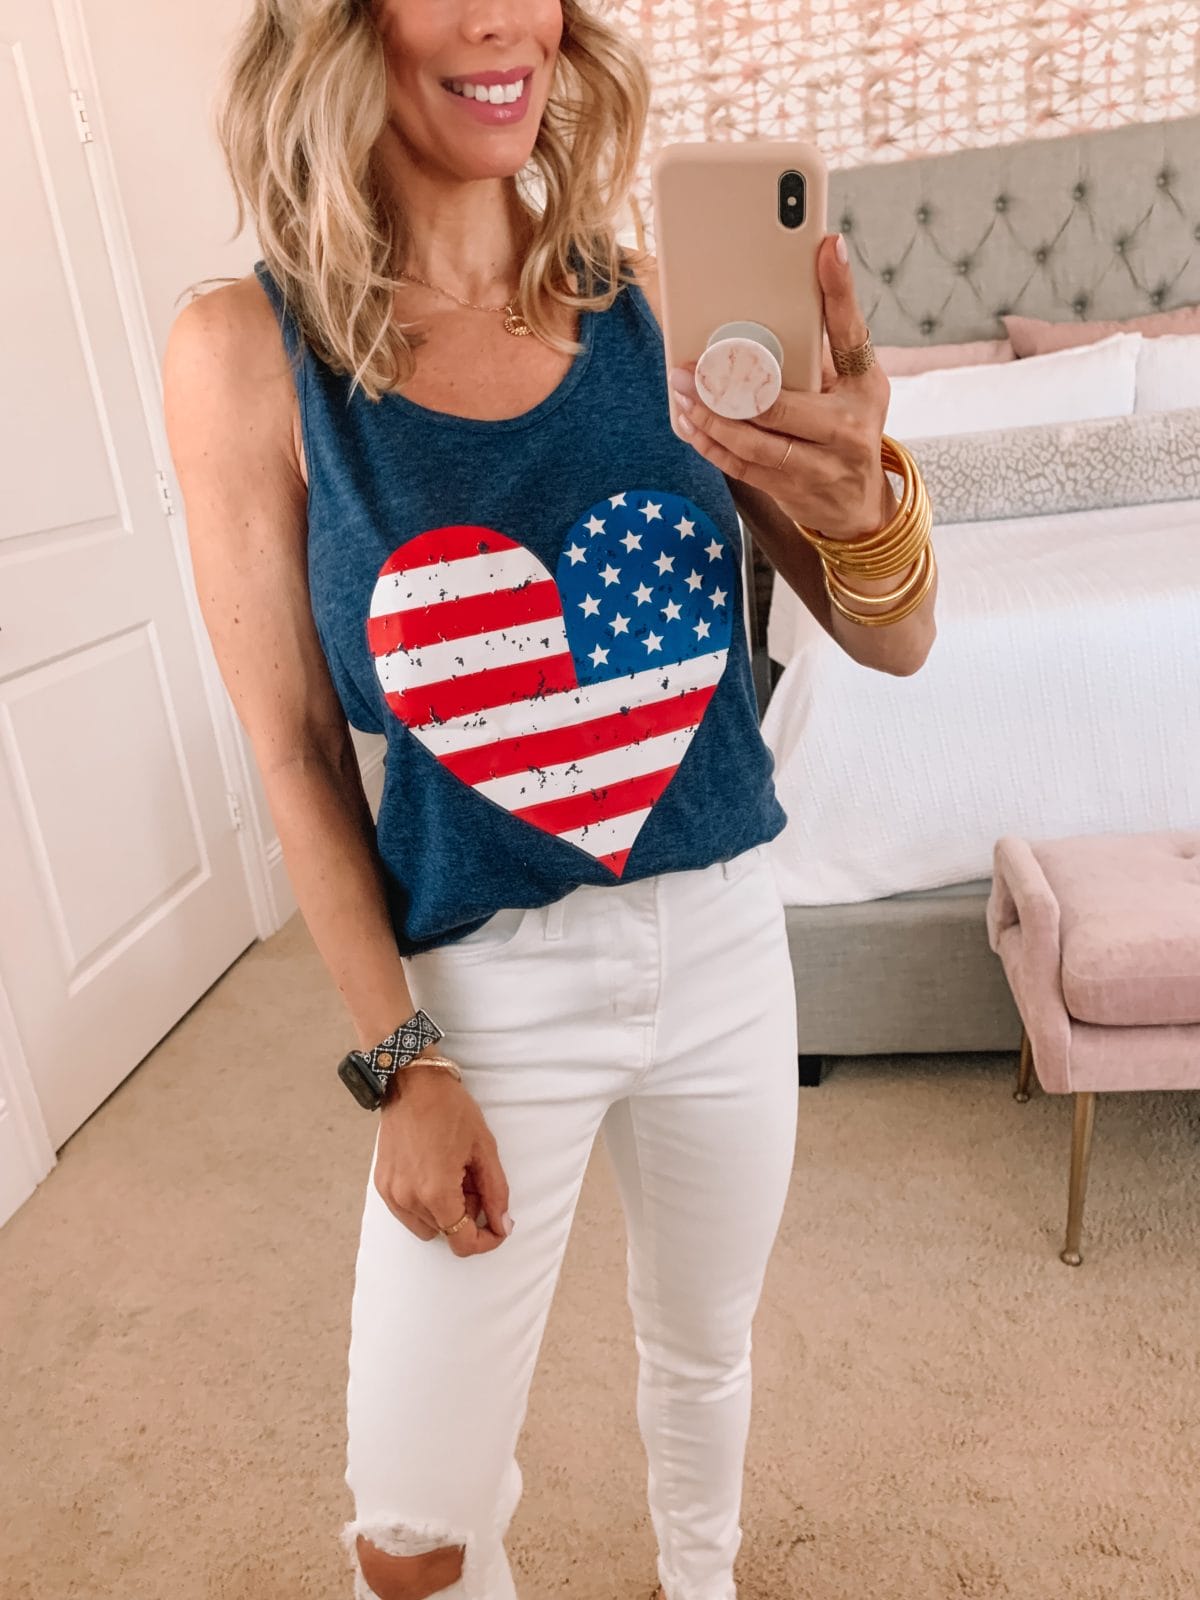 Amazon Fashion Faves, American Tank, White Jeans, Studded Sandals 